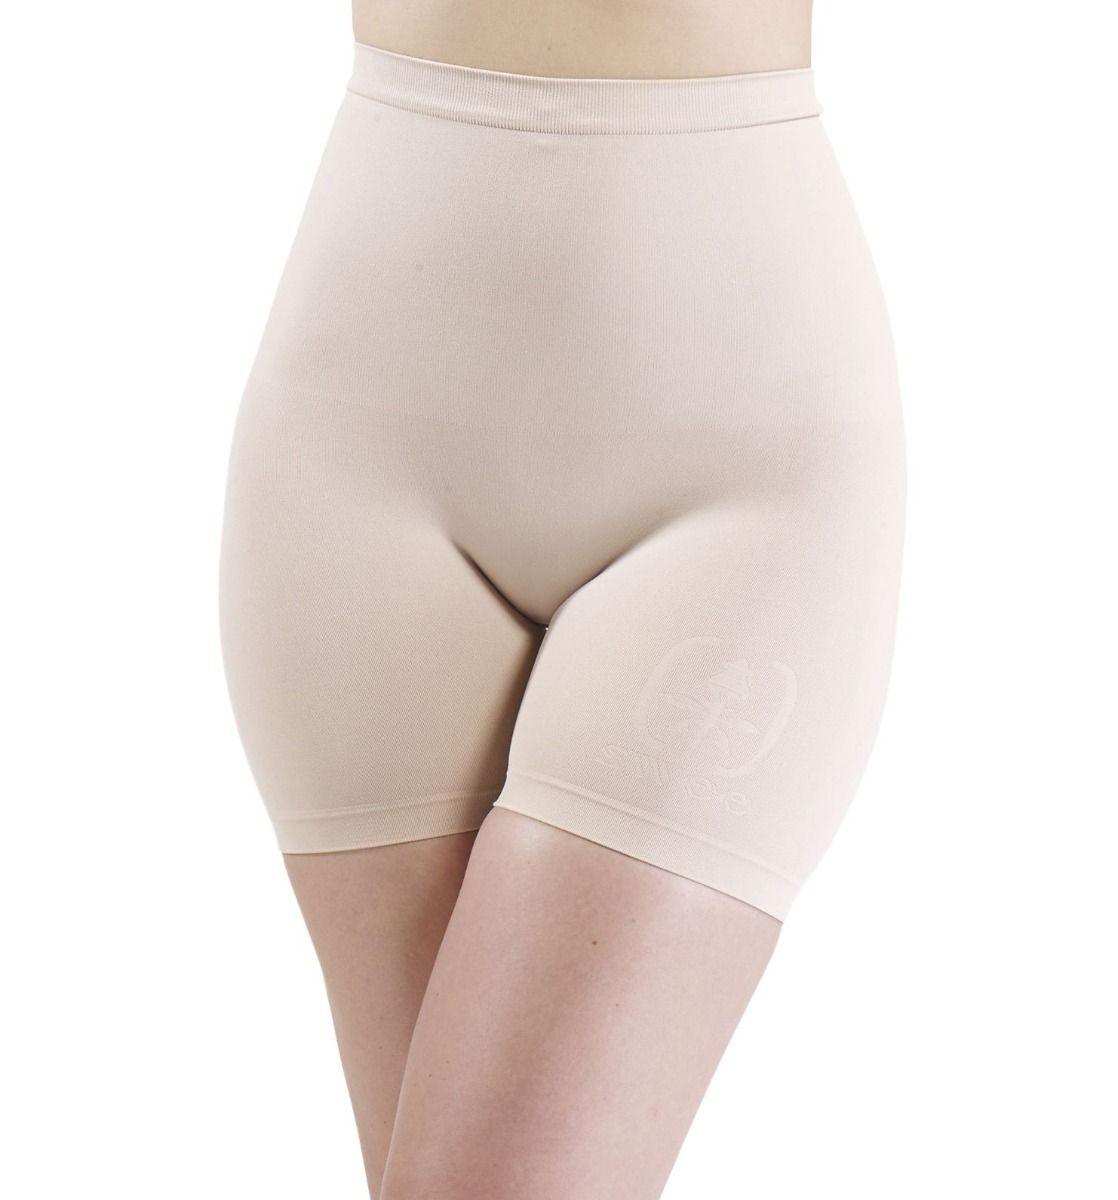 Omtex Iris Low Waist And Short Thigh Shaper, Nude